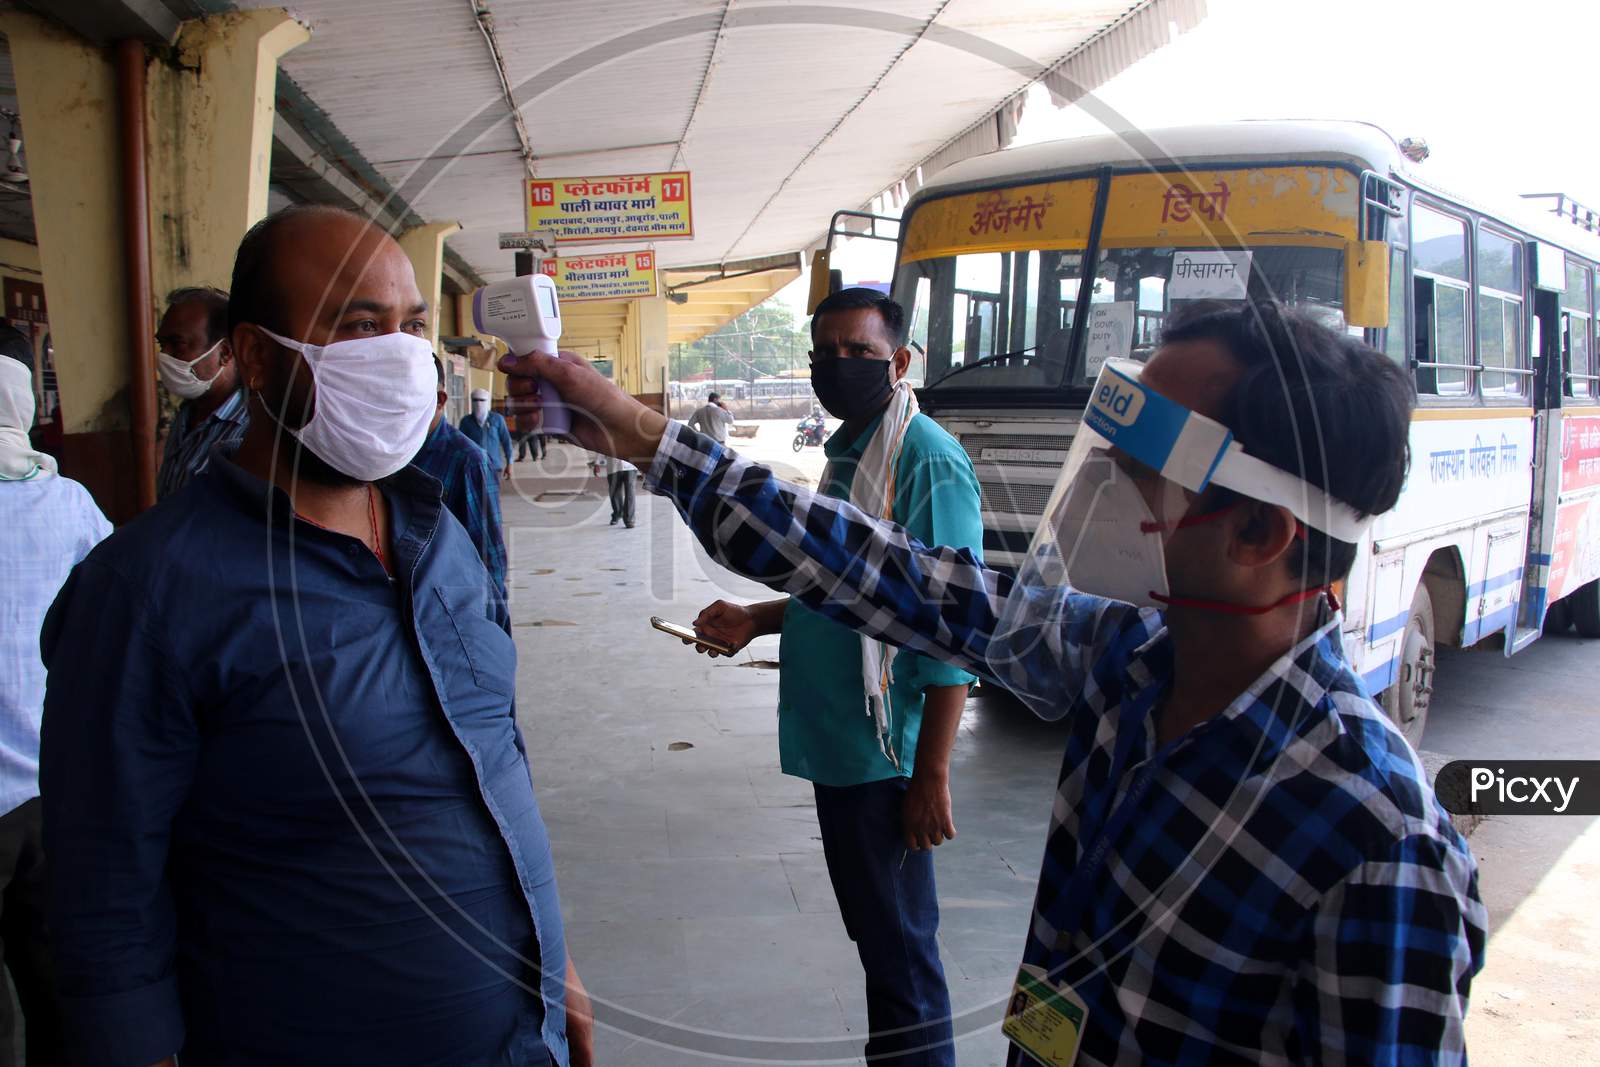 Passengers Undergo Thermal Screening As They Board A Public Bus Following Ease Of Restrictions, During The Fifth Phase Of Covid-19 Lockdown In Ajmer, Rajasthan, India On 03 June 2020.